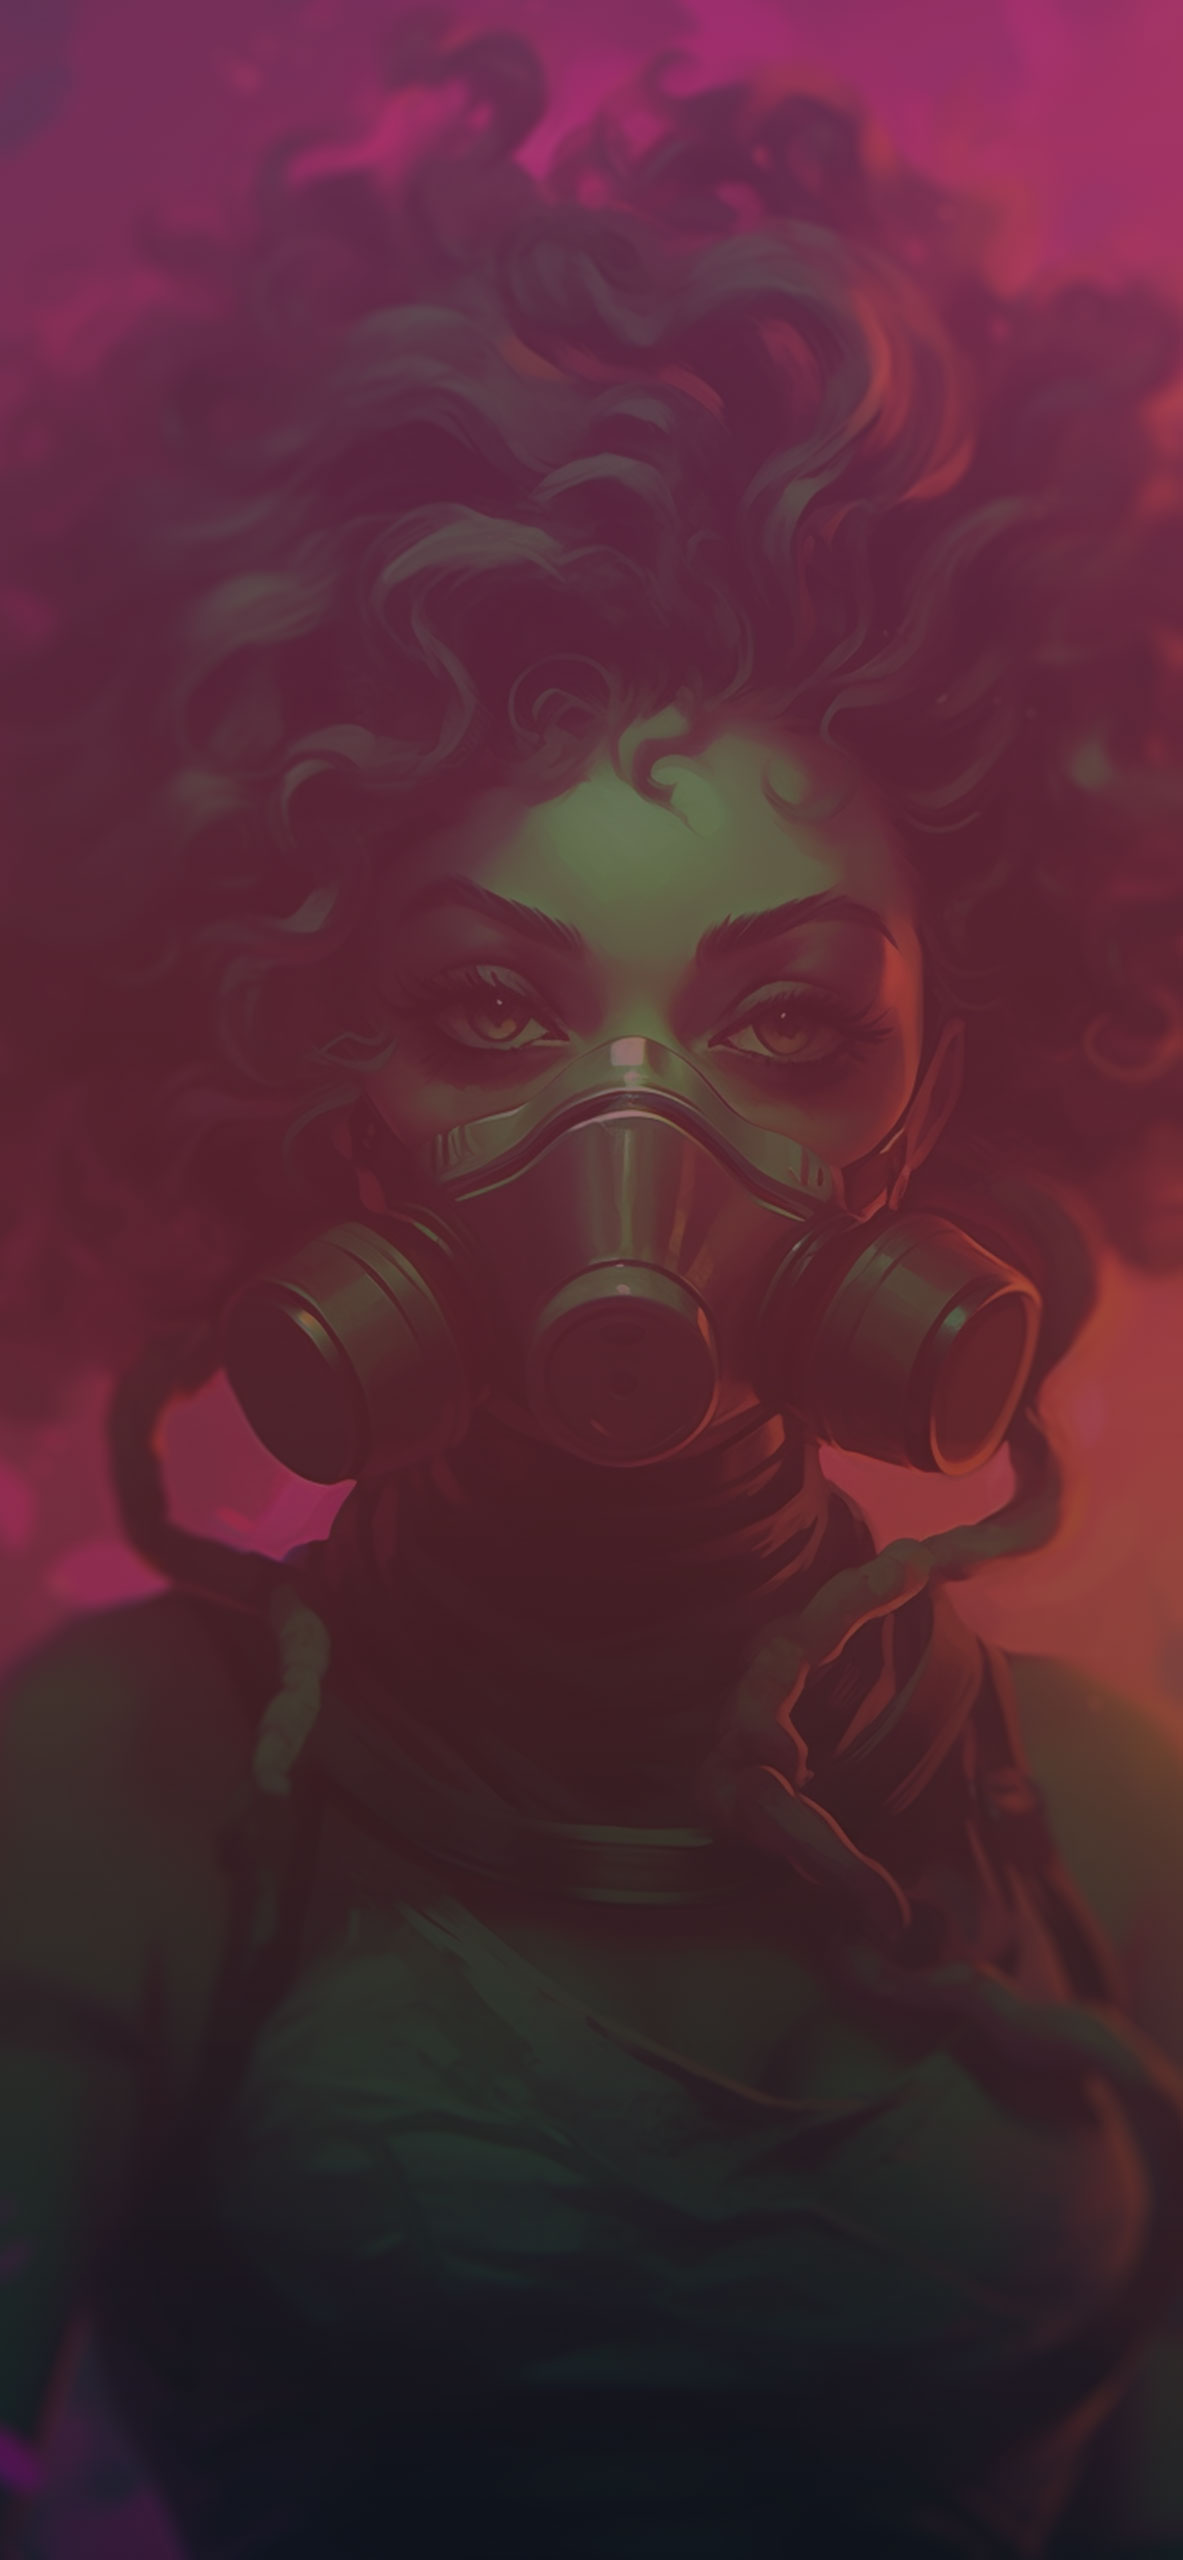 Girl in a Gas Mask Art Wallpaper Cool Girl Wallpaper for iPhon